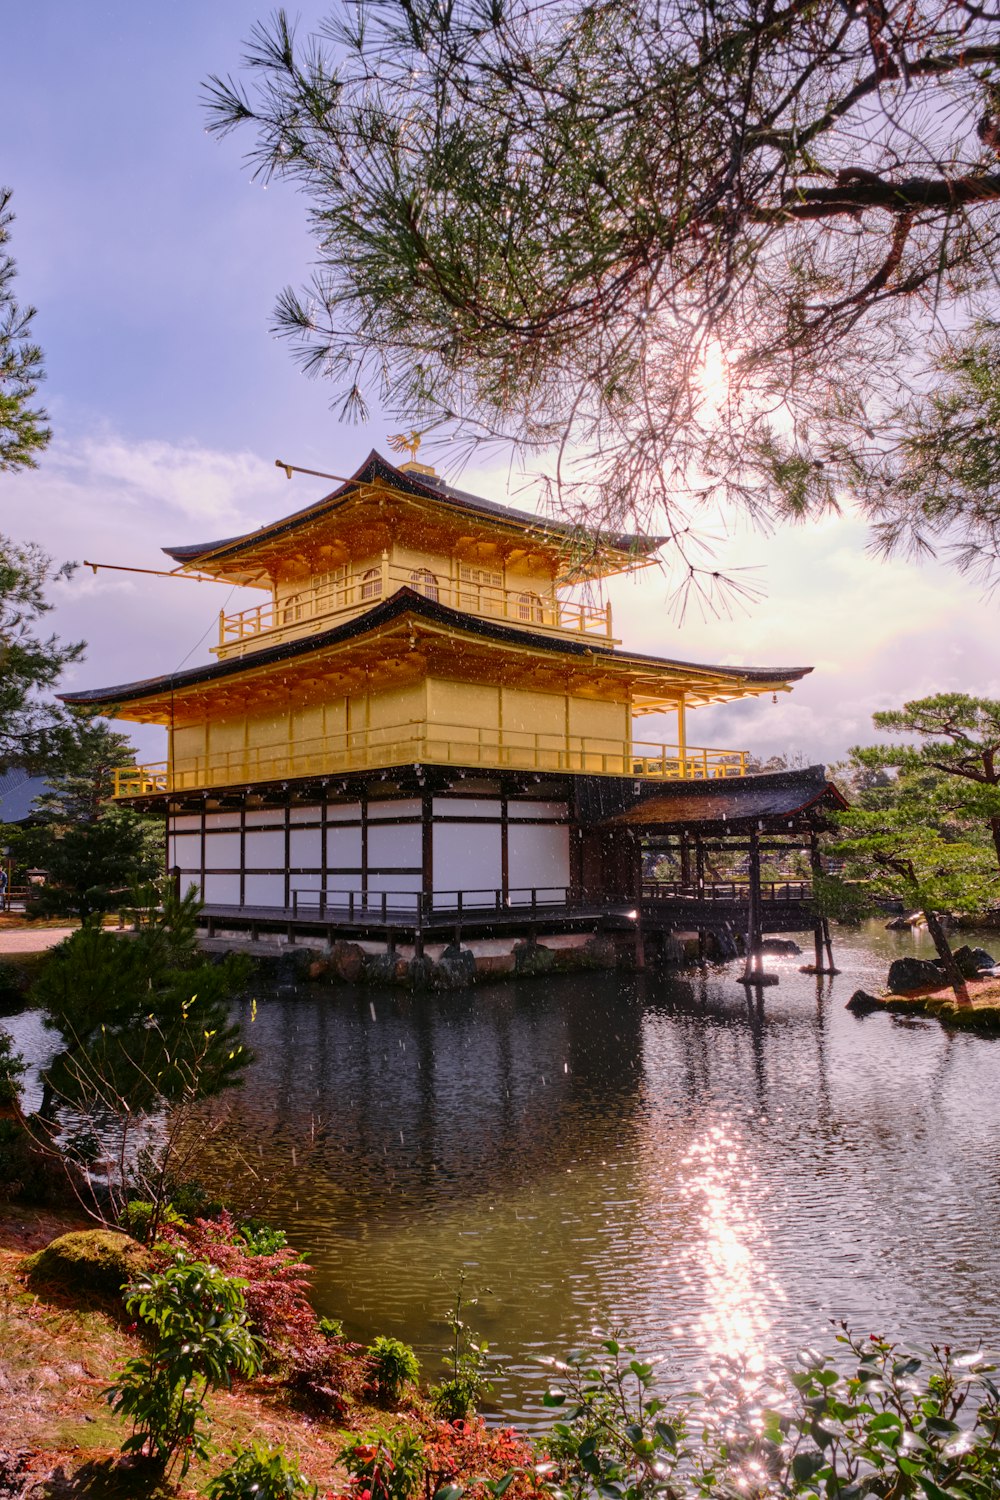 Kinkaku-ji with a large pond in front of it